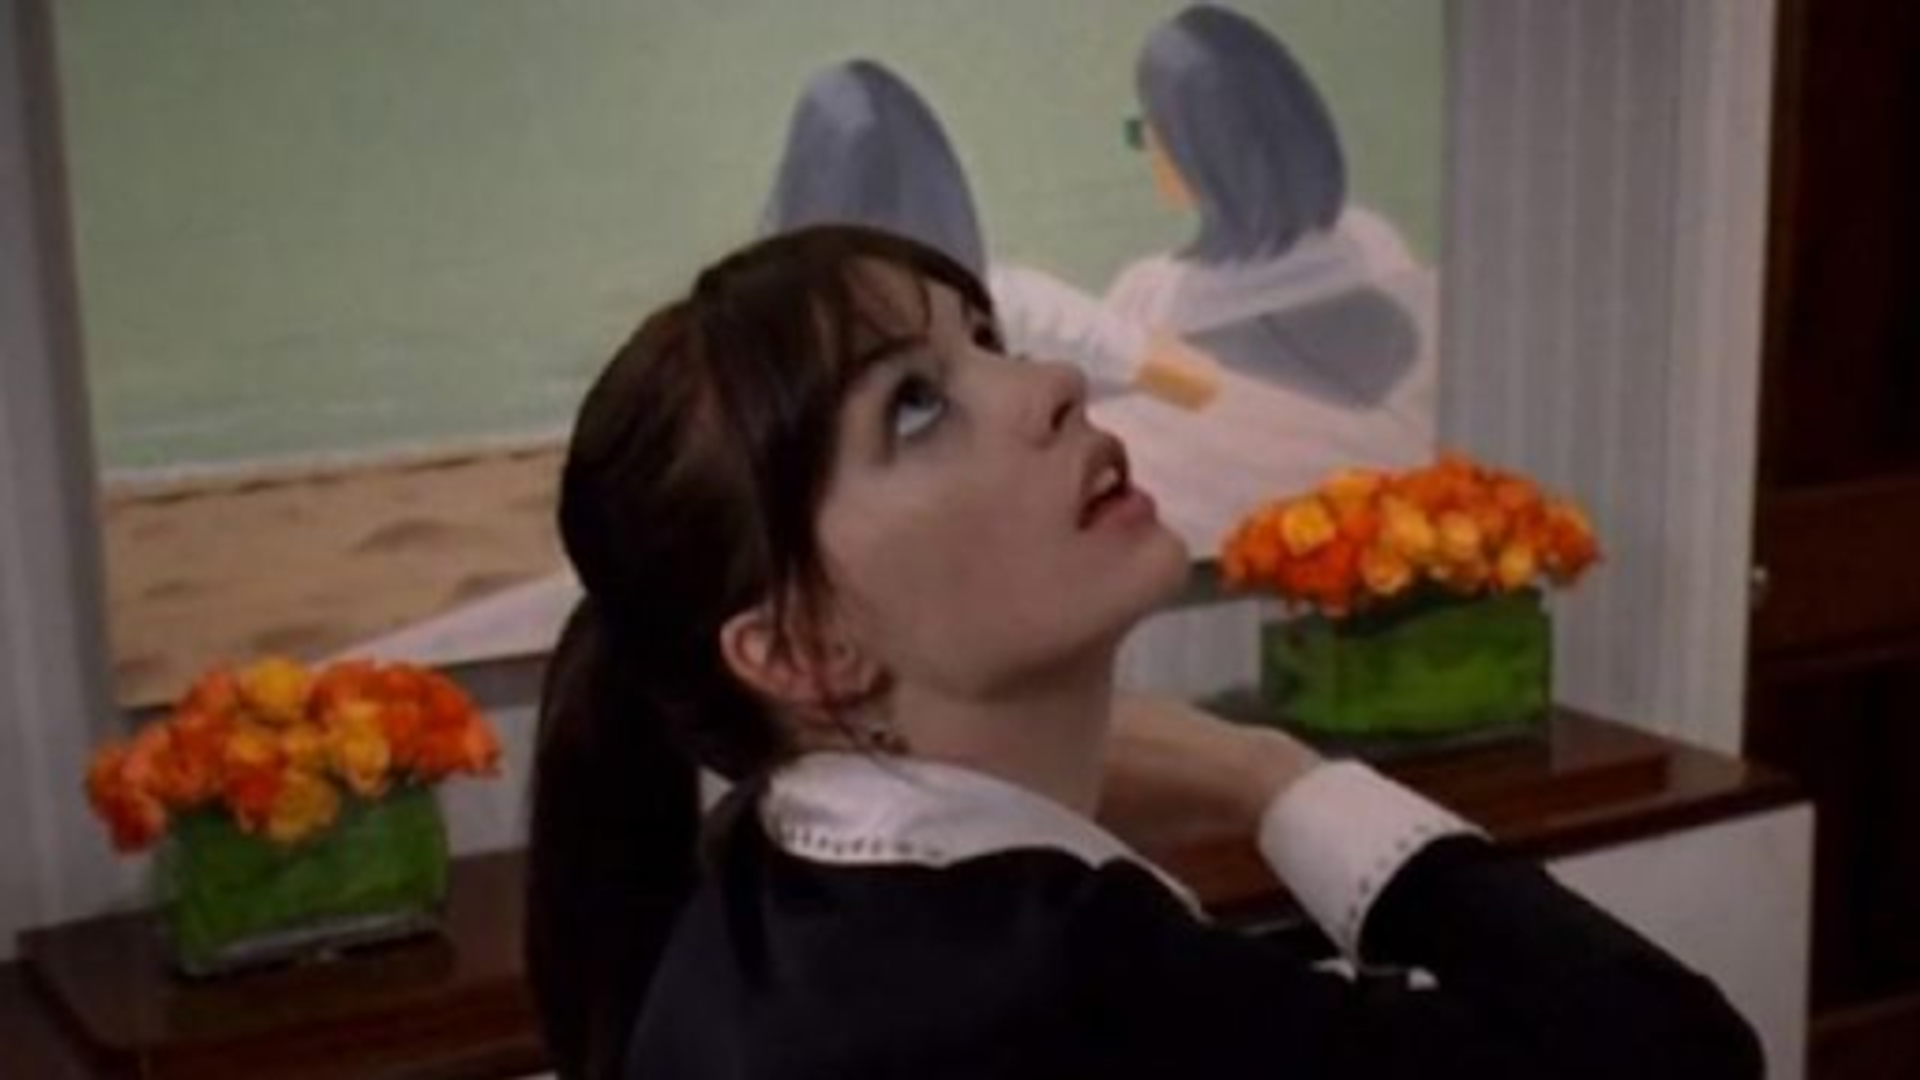 Photograph from the film The Devil Wears Prada. Woman looking up with a painting and floral arrangements on a table behind her. 